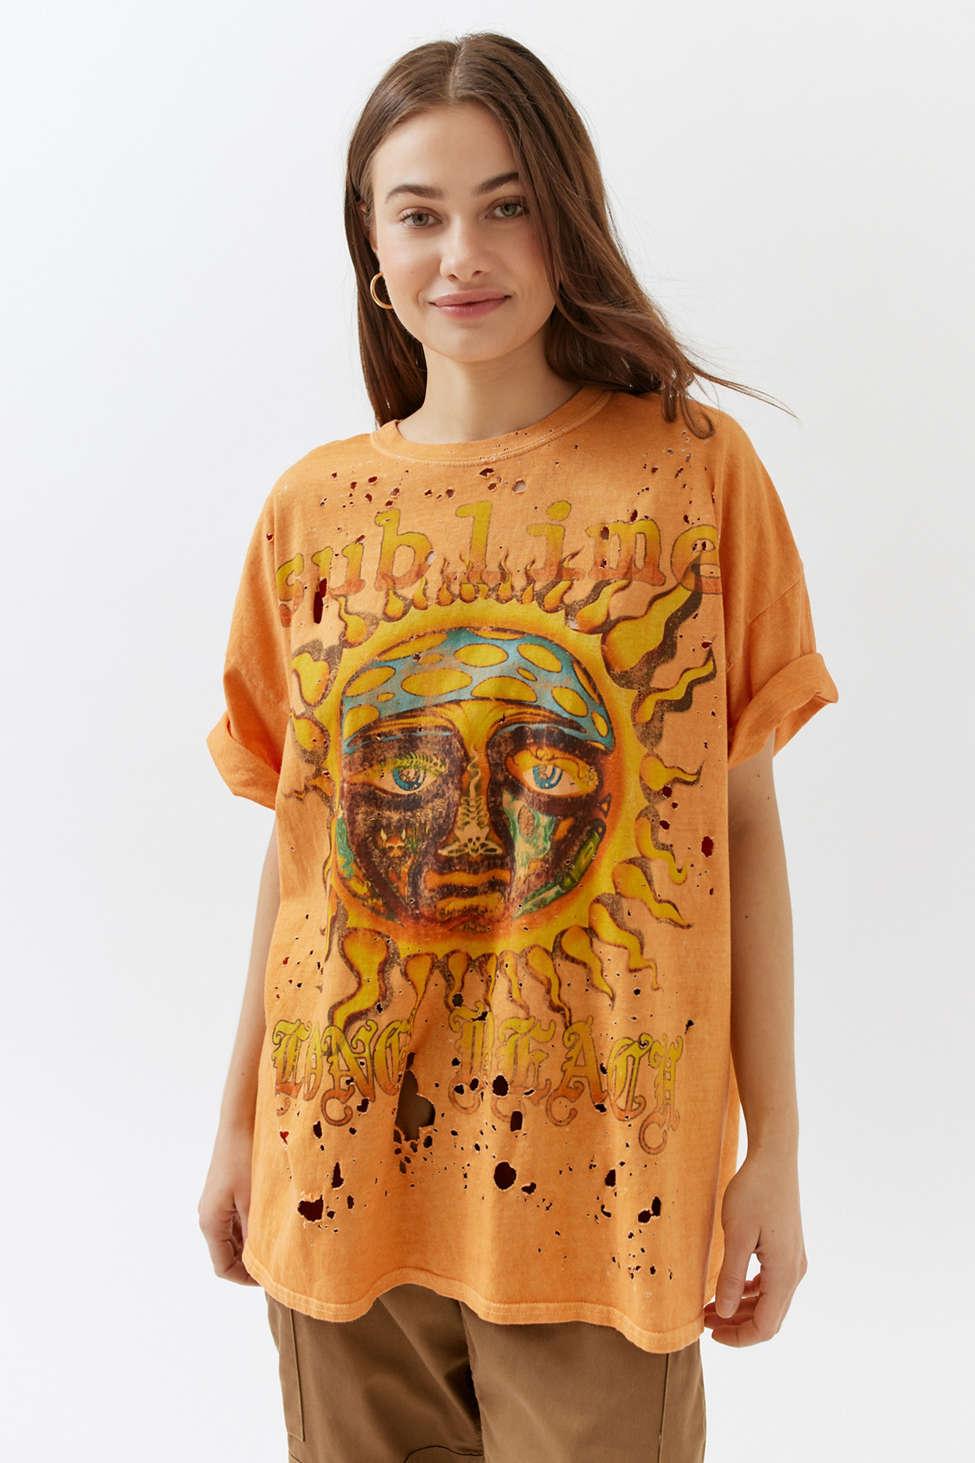 Urban Outfitters Sublime T-shirt Dress in Orange | Lyst